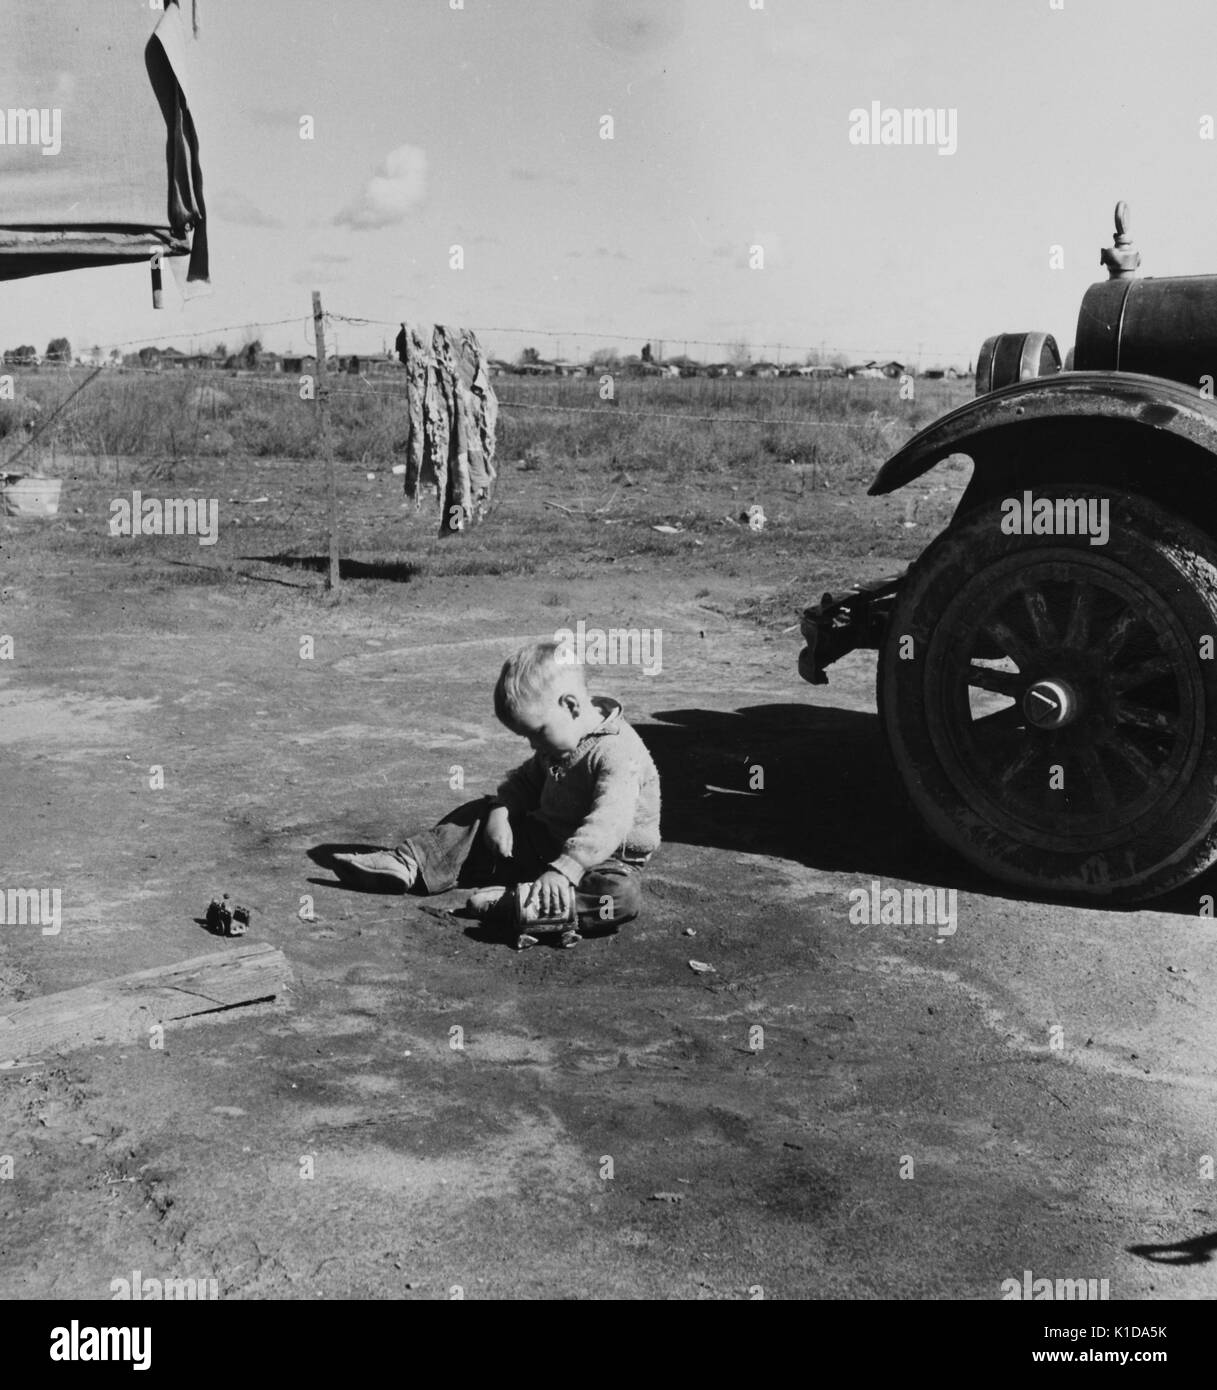 A small boy playing with a handmade toy wagon in the dirt of a migrant camp, near a car, a piece of ruggedly made clothing dries in the background, California, 1936. From the New York Public Library. Stock Photo